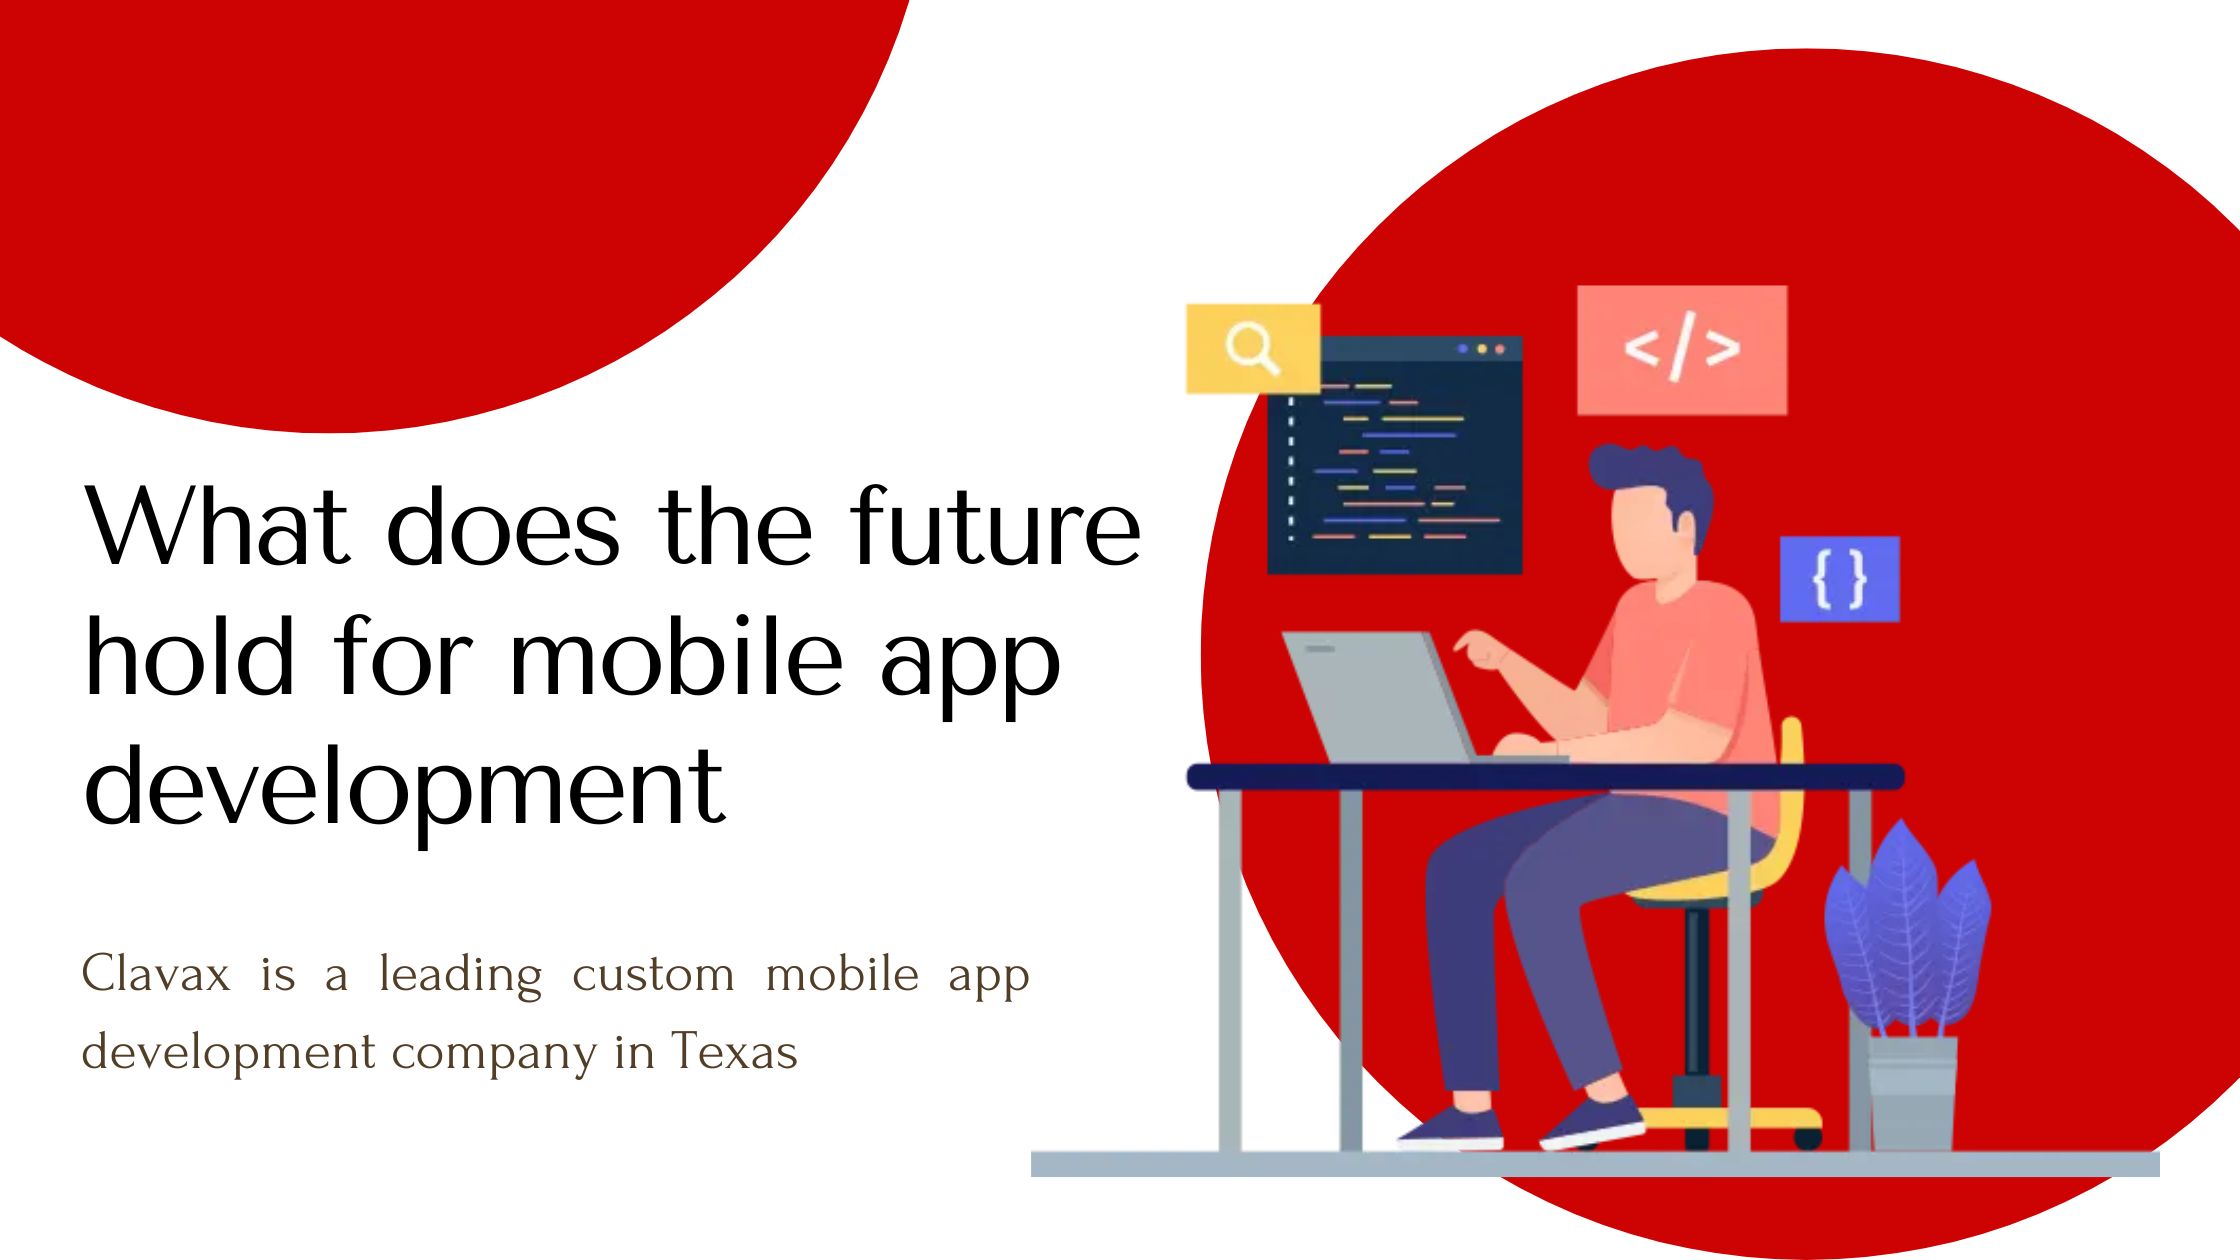 What does the future hold for mobile app development